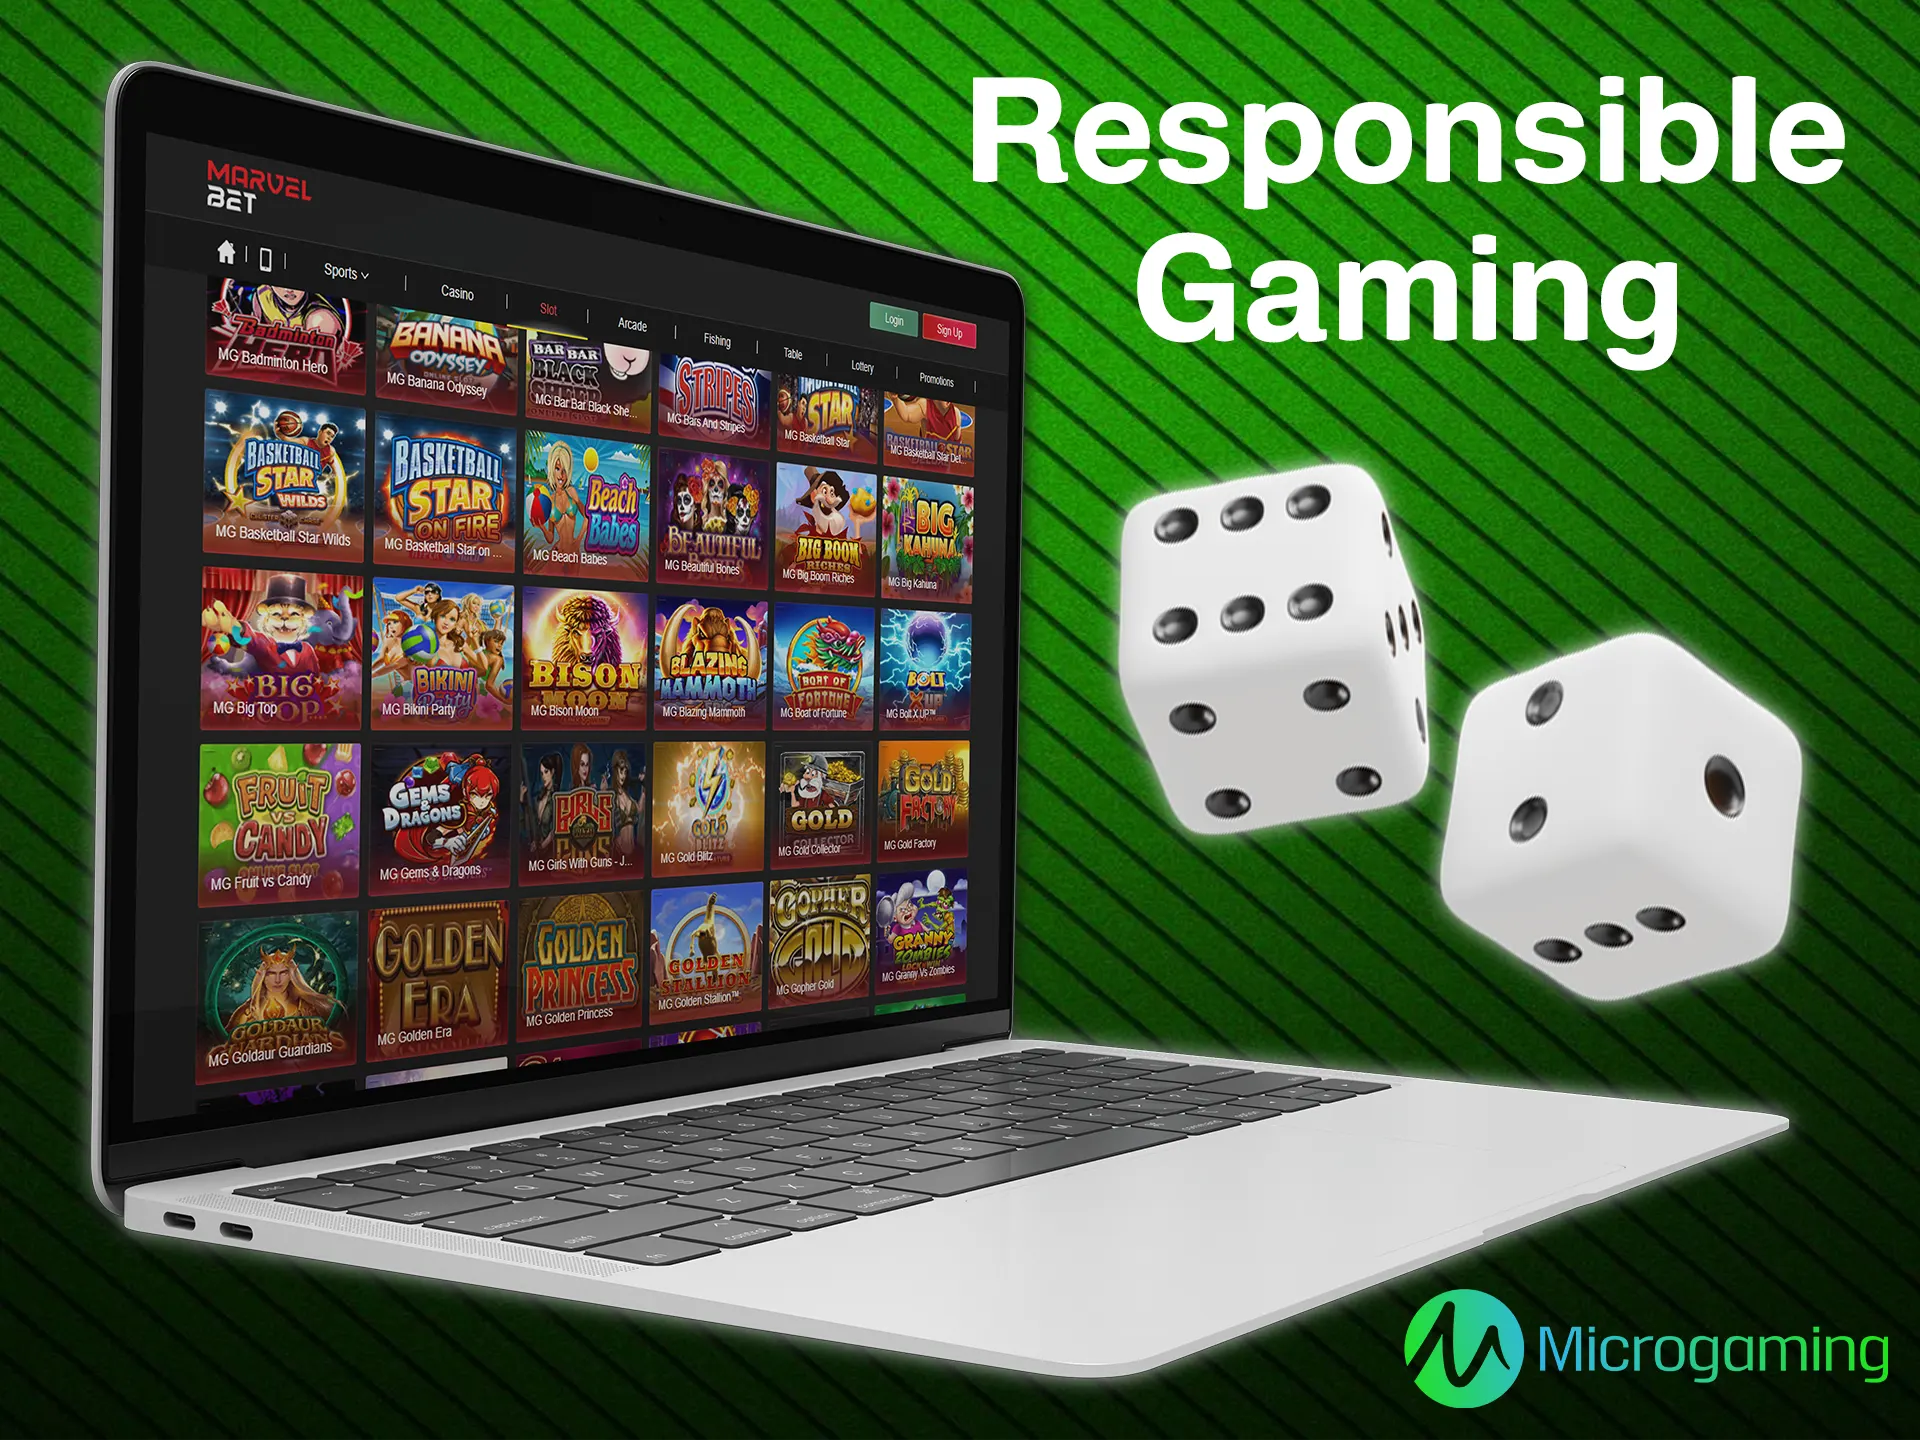 Make your bets carefully when playing Microgaming casino games.